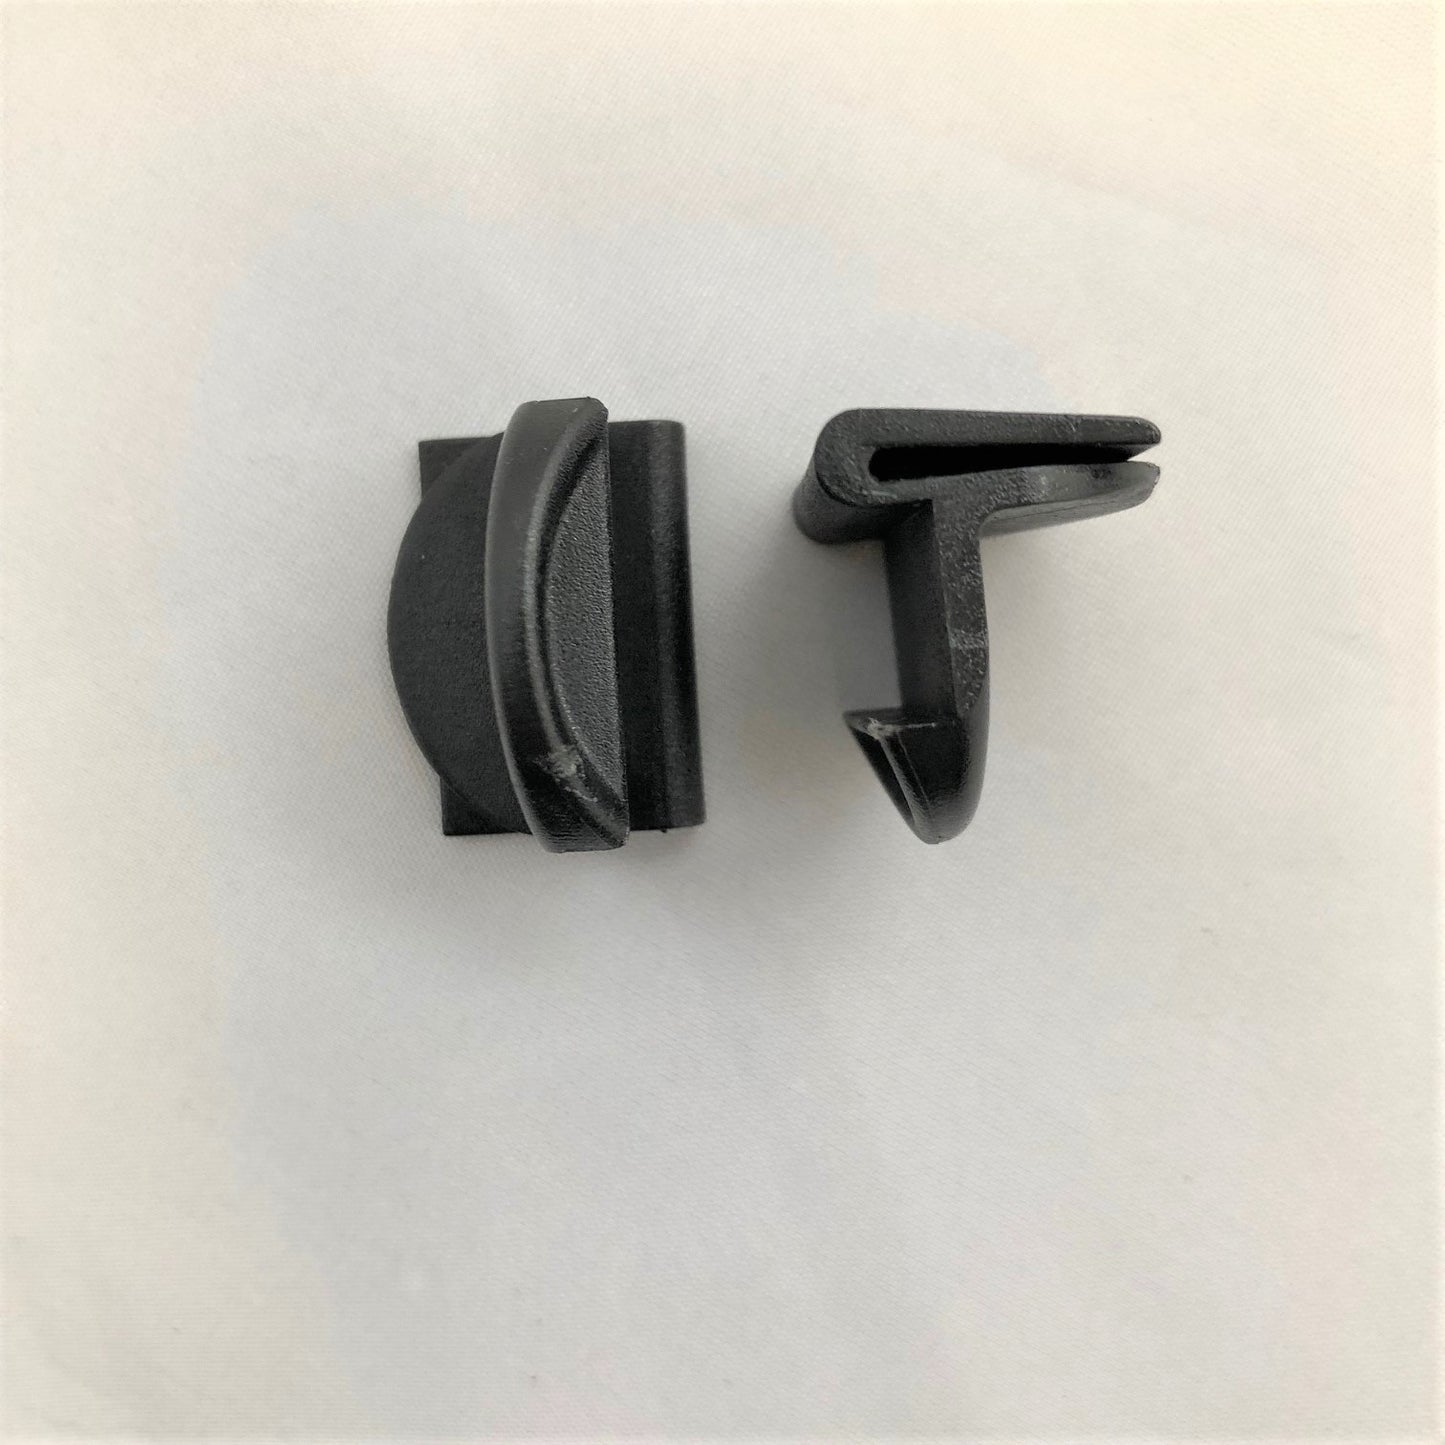 FLYSCREEN clips to suit Boral Fly Screen Windows